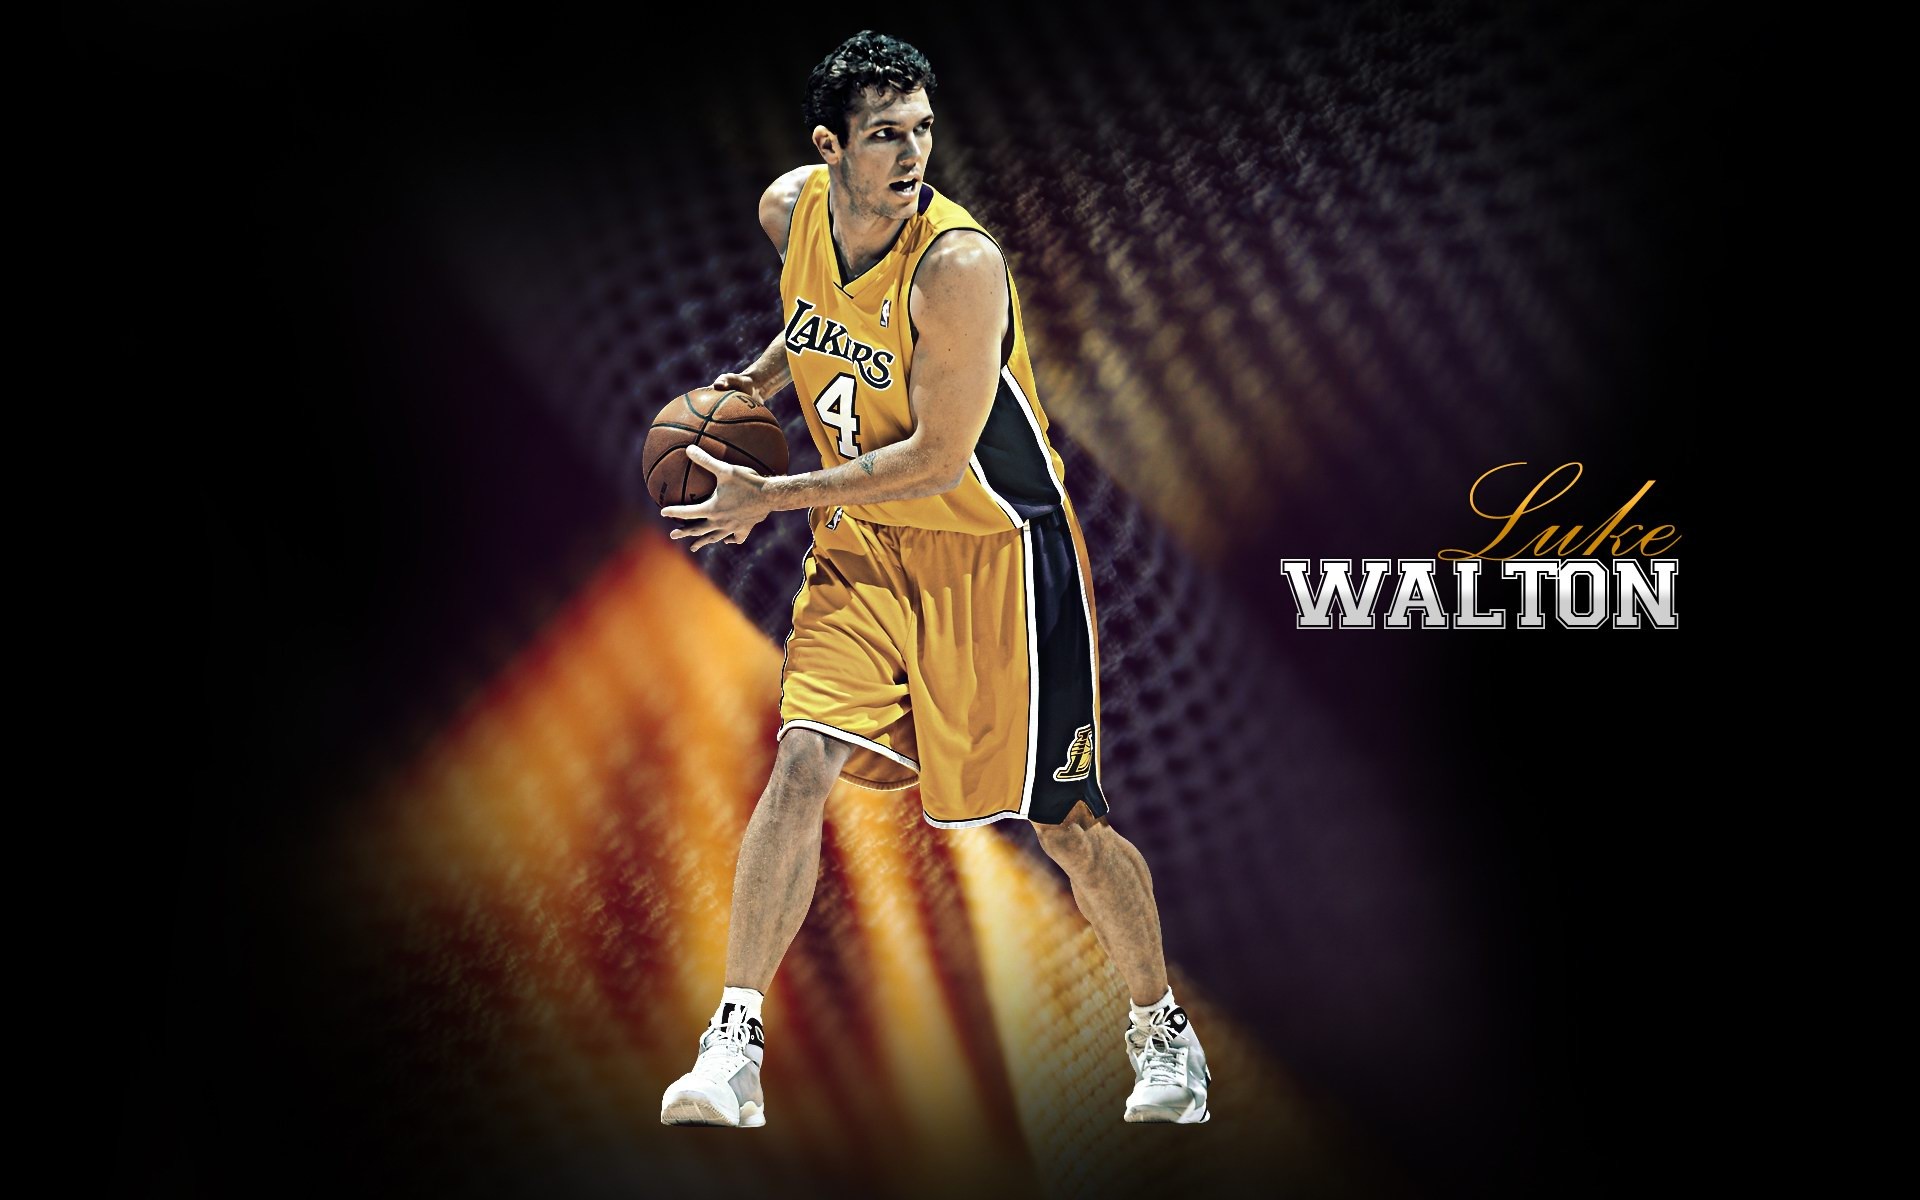 Los Angeles Lakers Official Wallpaper #18 - 1920x1200